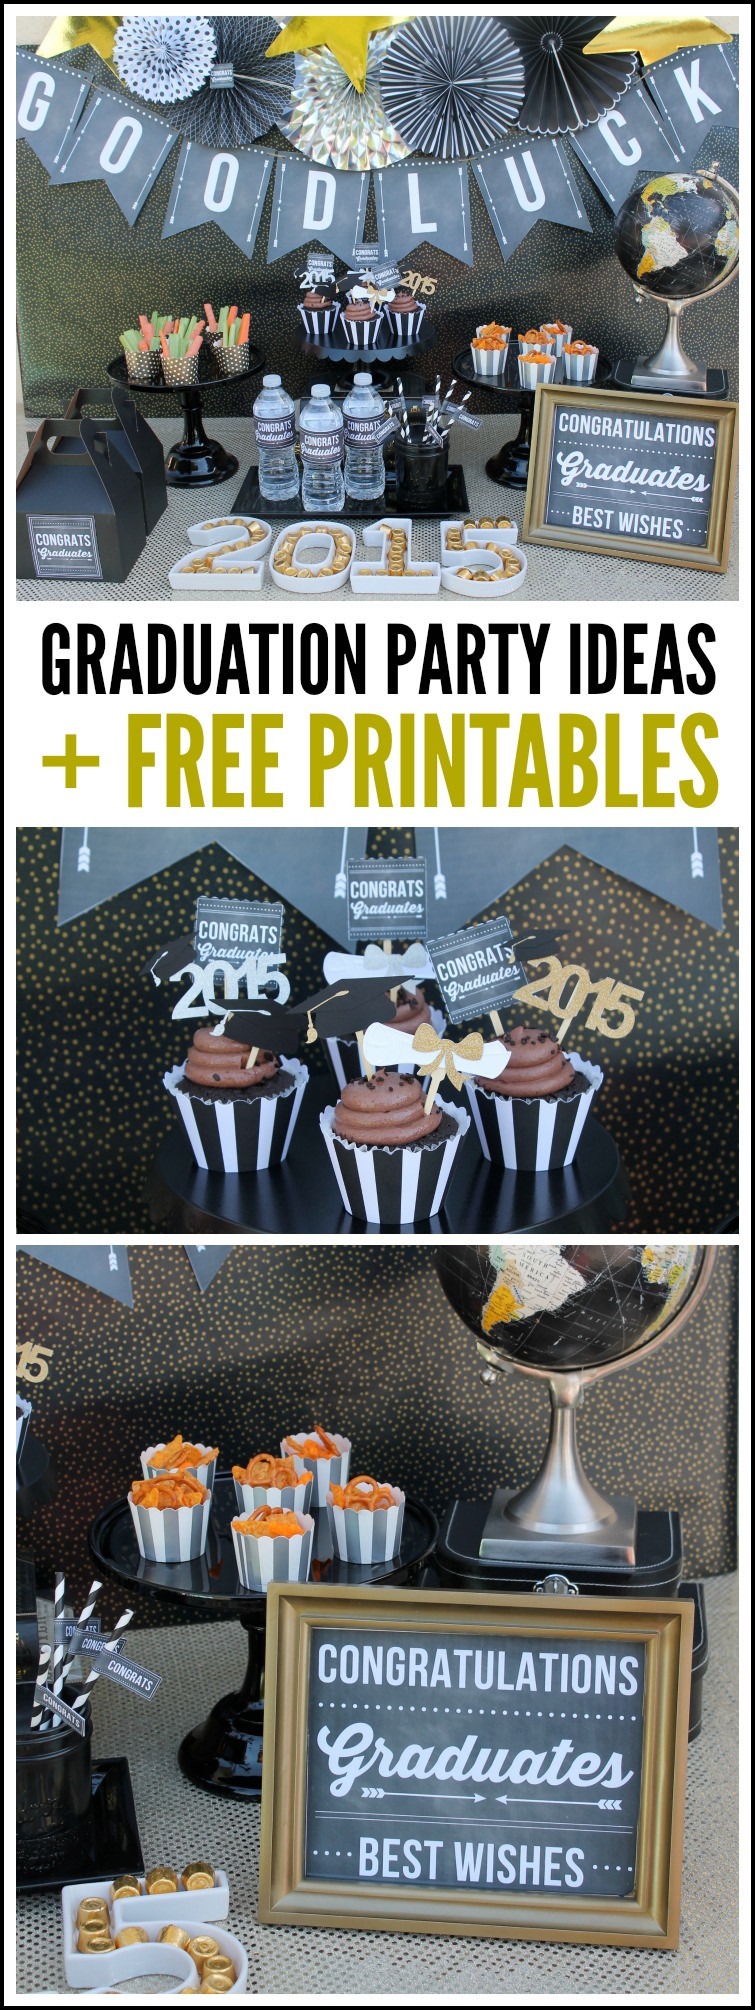 Ideas For Table Decorations For Graduation Party
 Graduation Party Ideas Free Printables